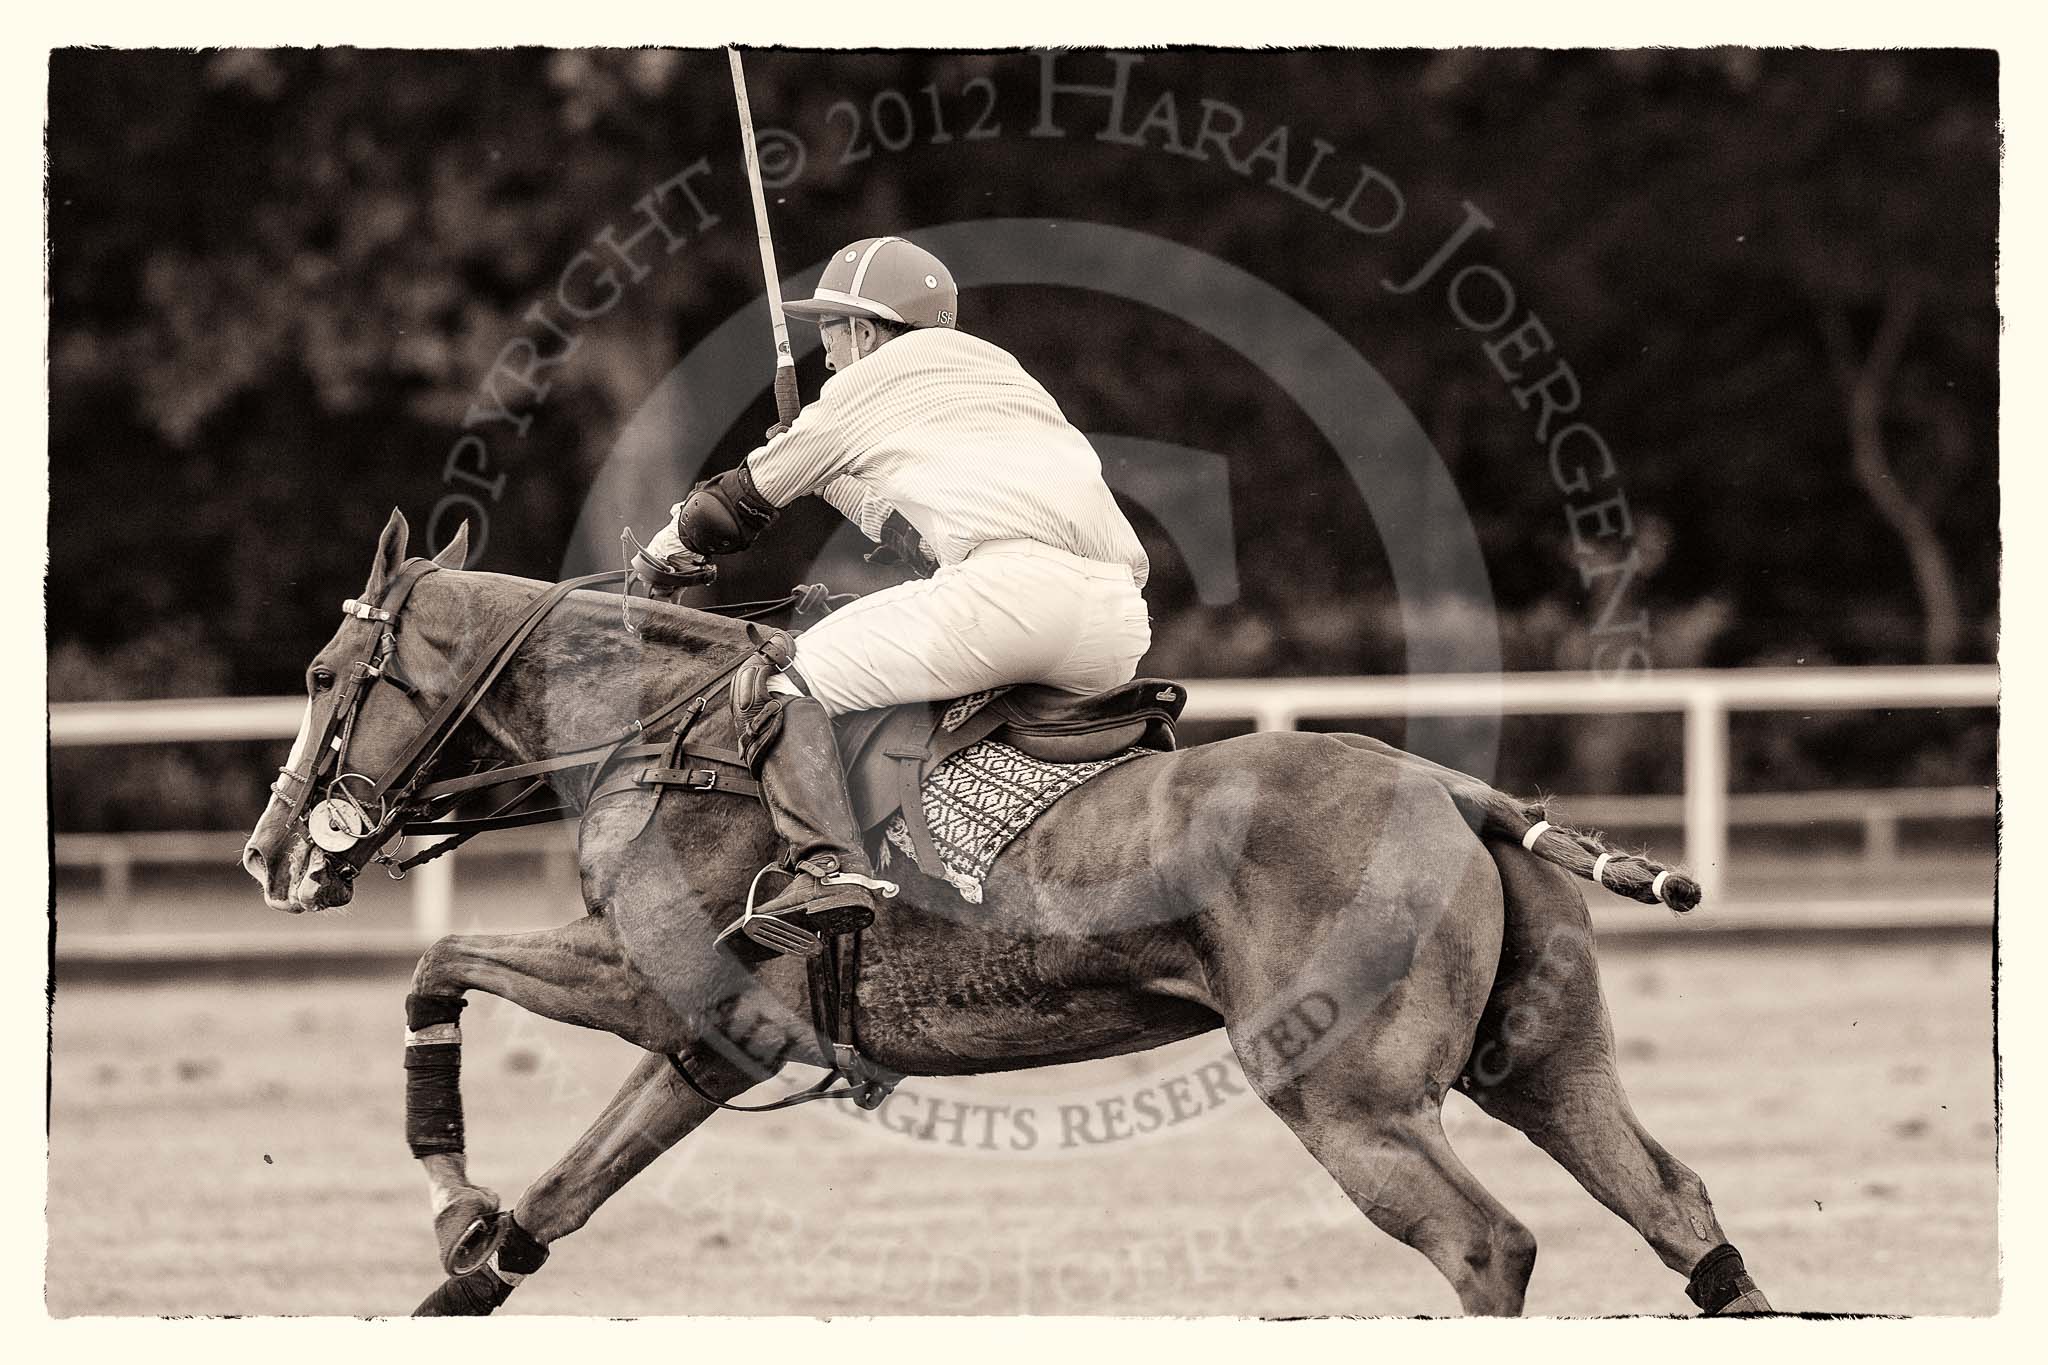 7th Heritage Polo Cup finals: Sebastian Funes..
Hurtwood Park Polo Club,
Ewhurst Green,
Surrey,
United Kingdom,
on 05 August 2012 at 13:58, image #55